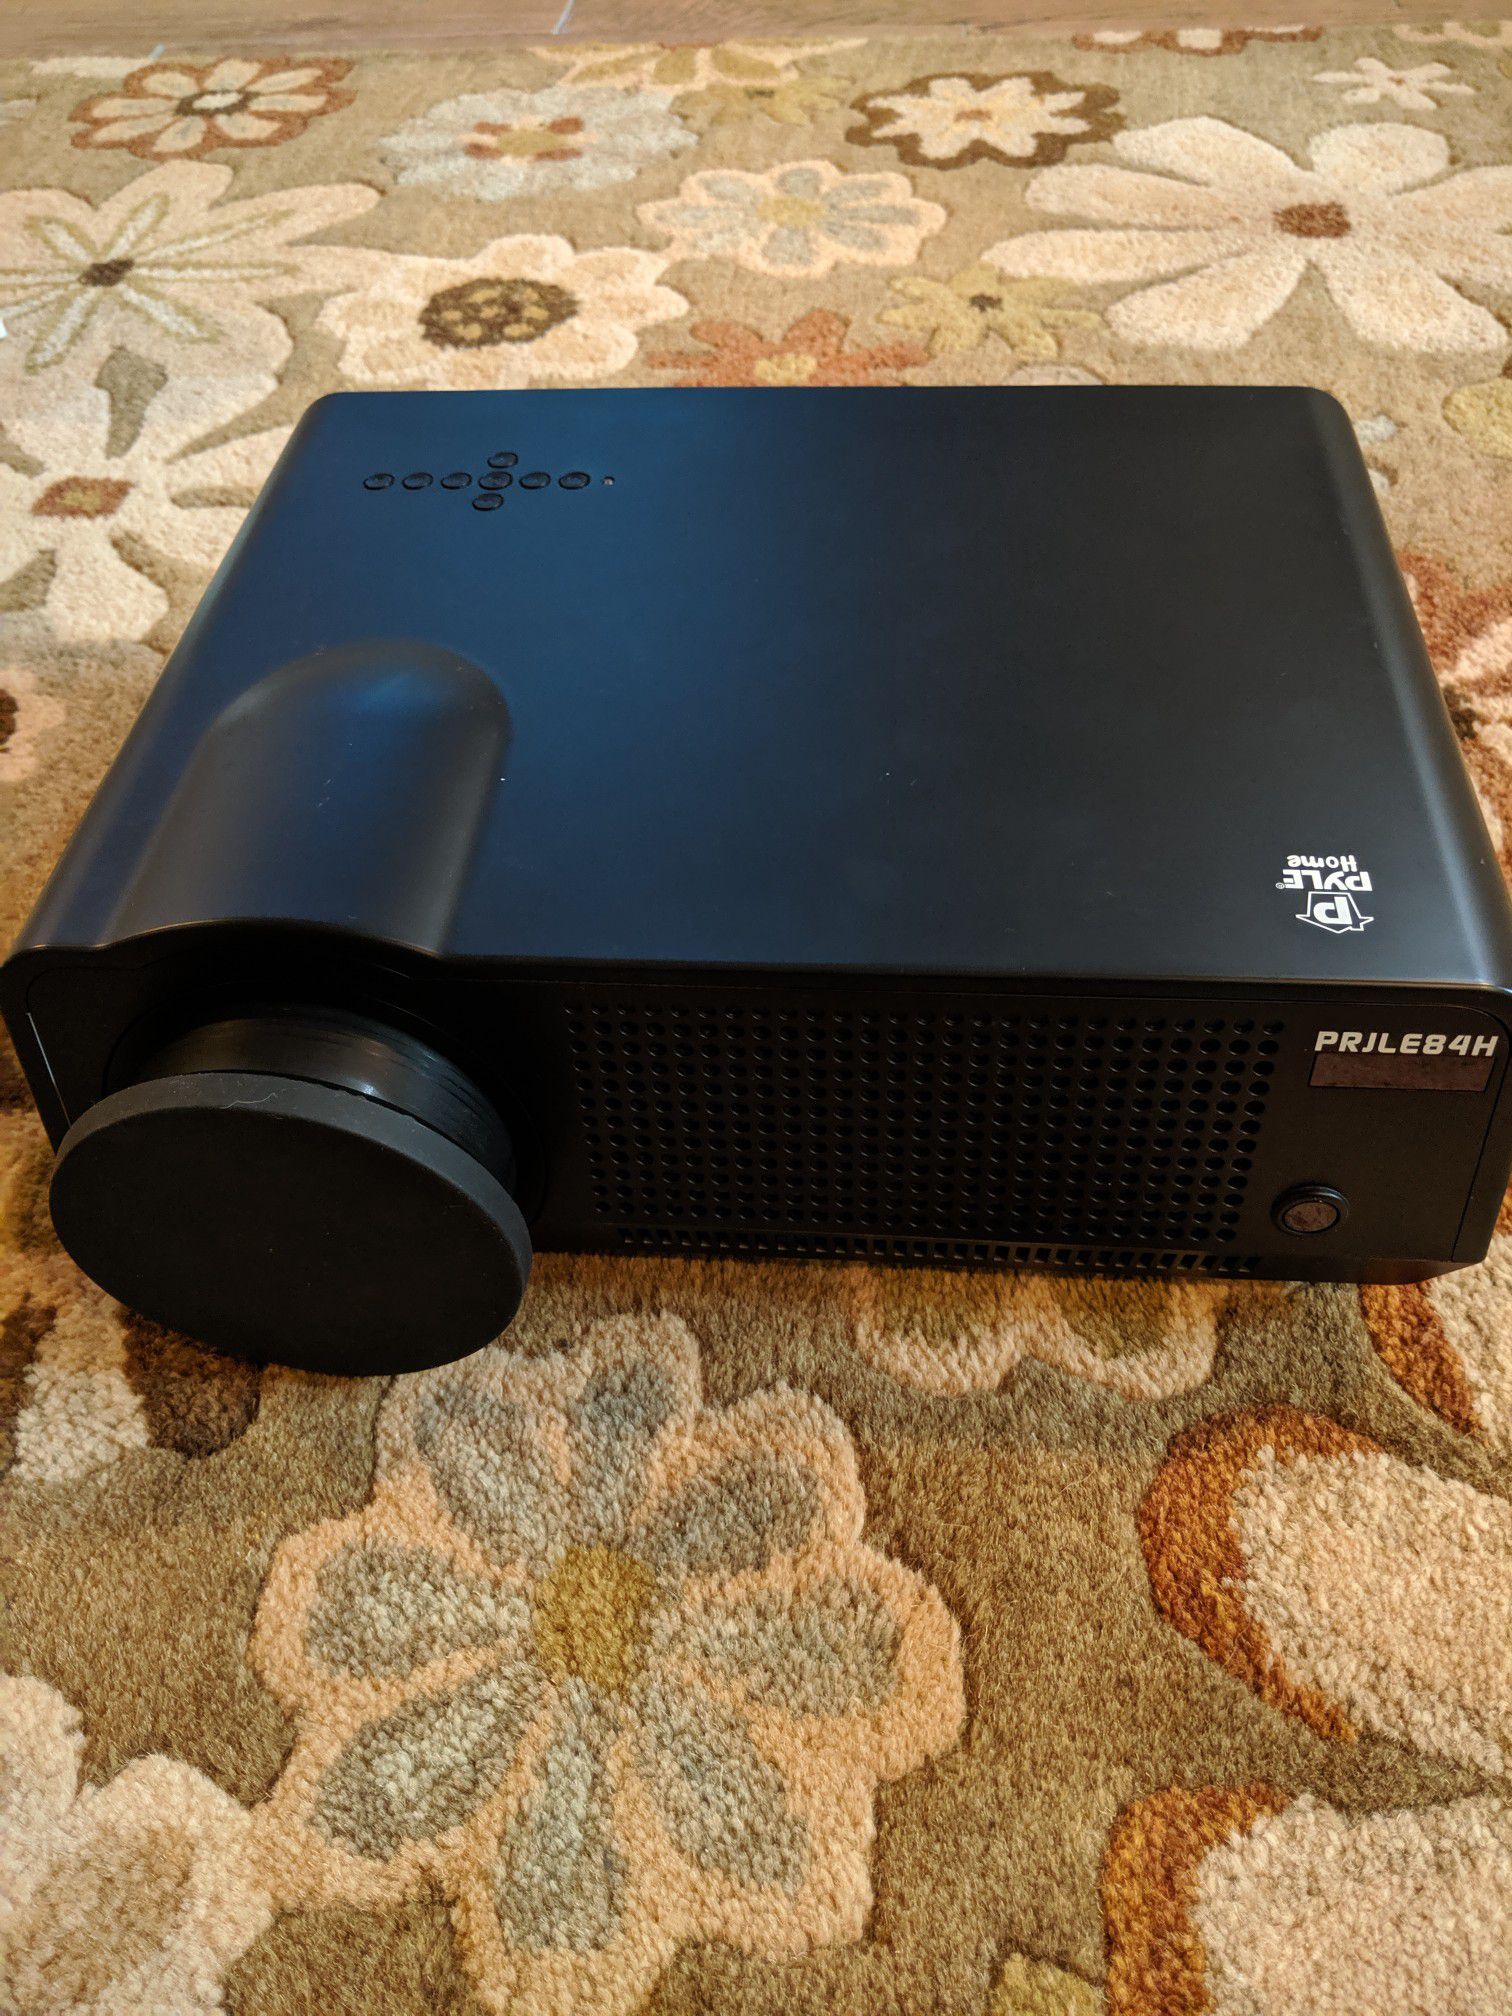 Pyle 1080p home theater projector